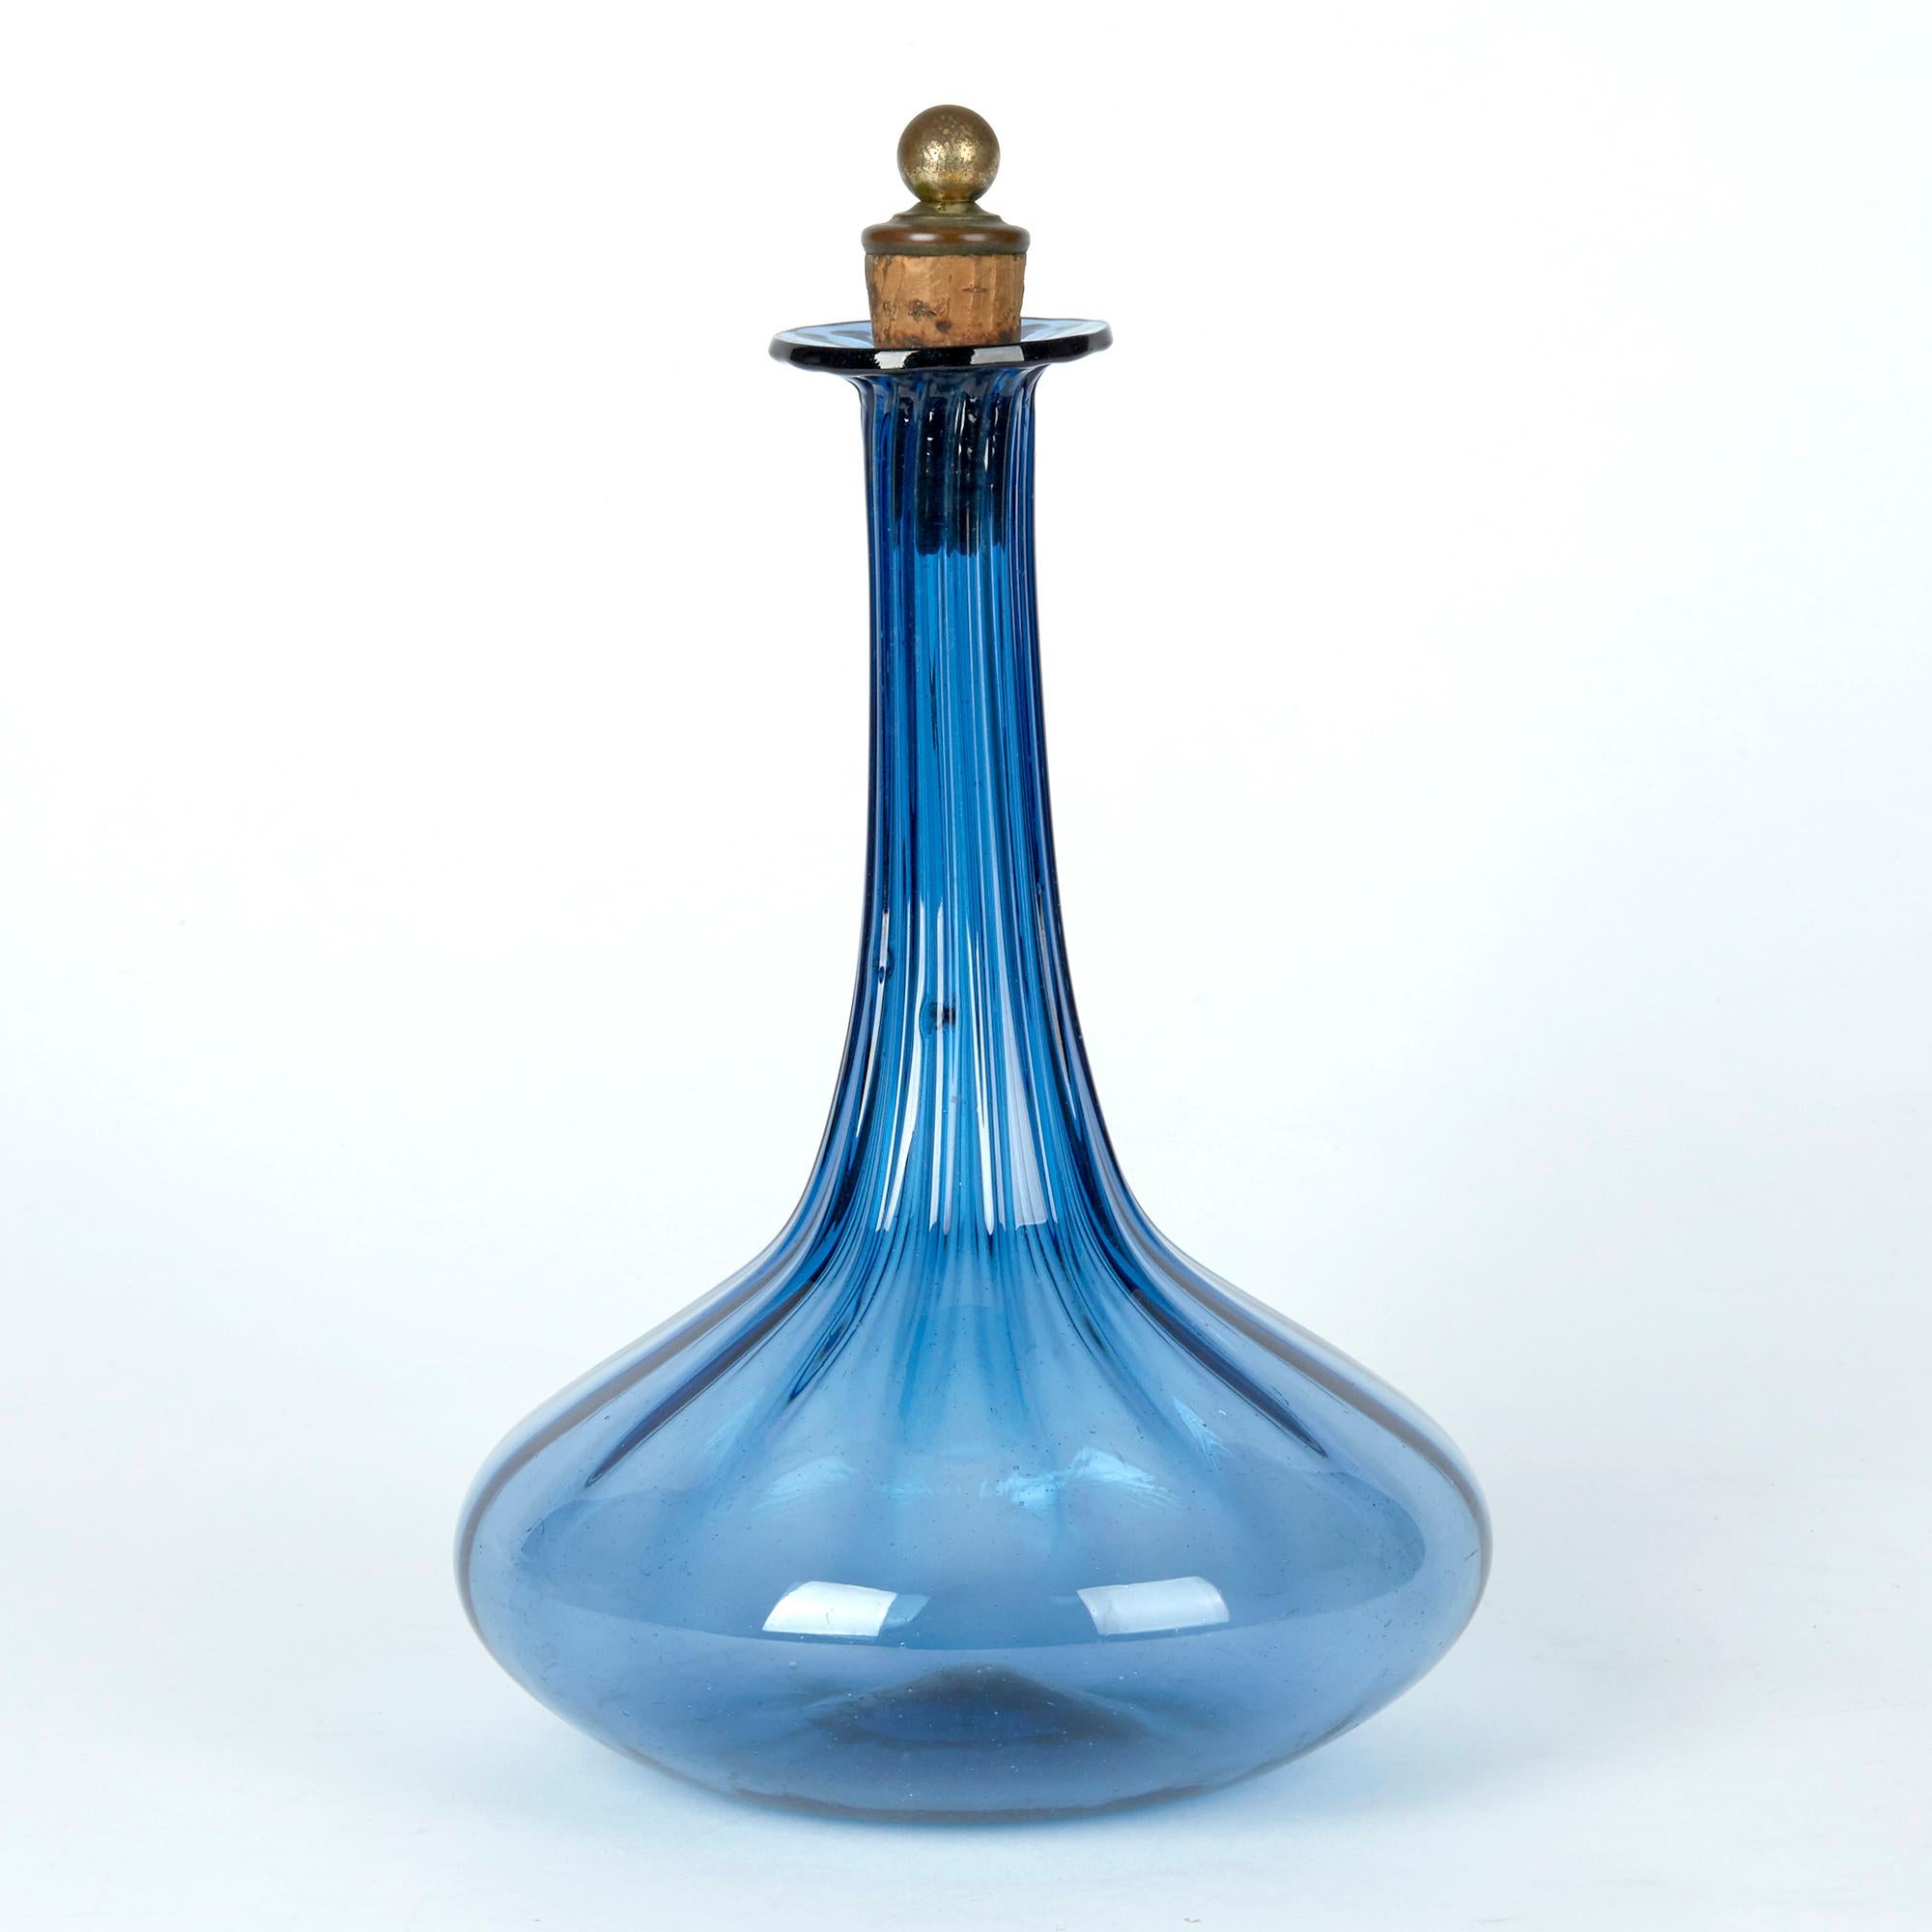 An unusual antique Georgian blue glass decanter with ribbed body and cork stopper dating from circa 1820. The decanter has a squat rounded body, tall slender neck and fold back flat drip rim. The hand blown decanter has a flat base with polished